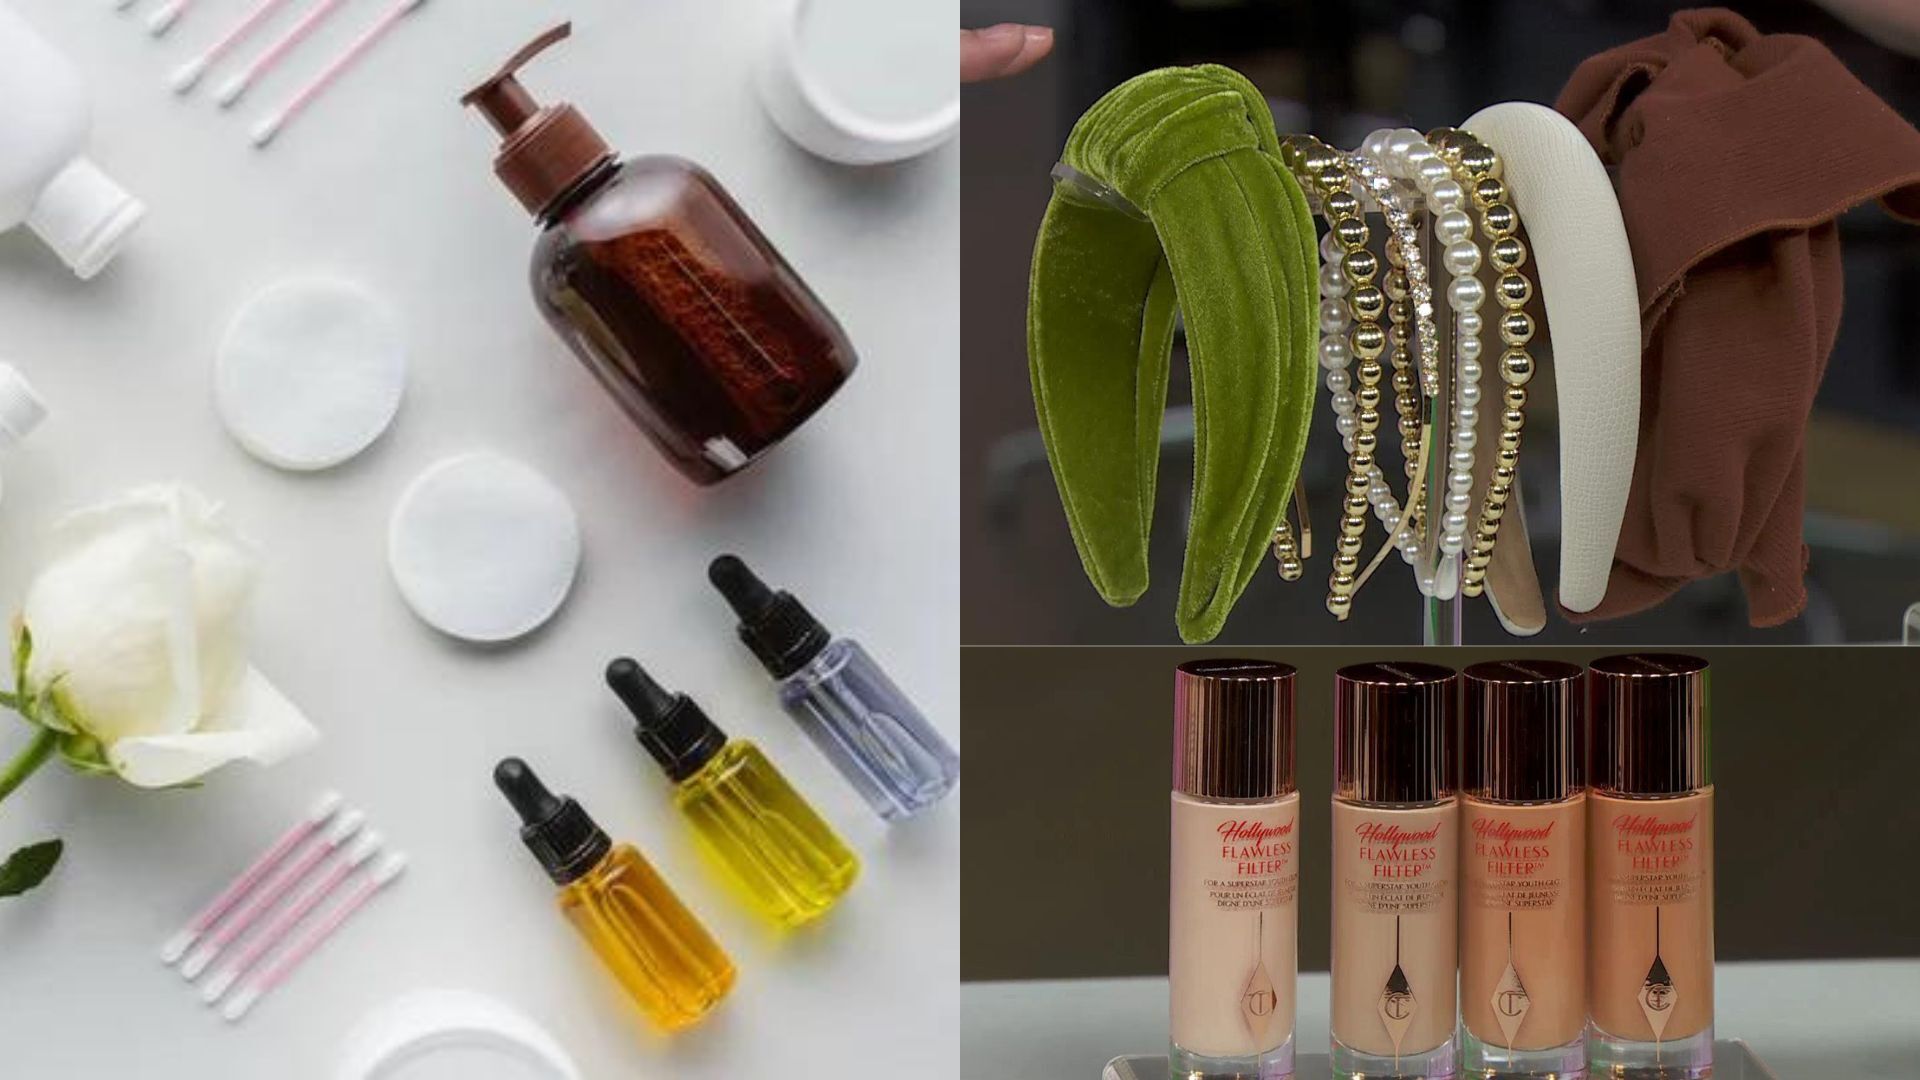 Step flawlessly into spring with these trendy beauty products